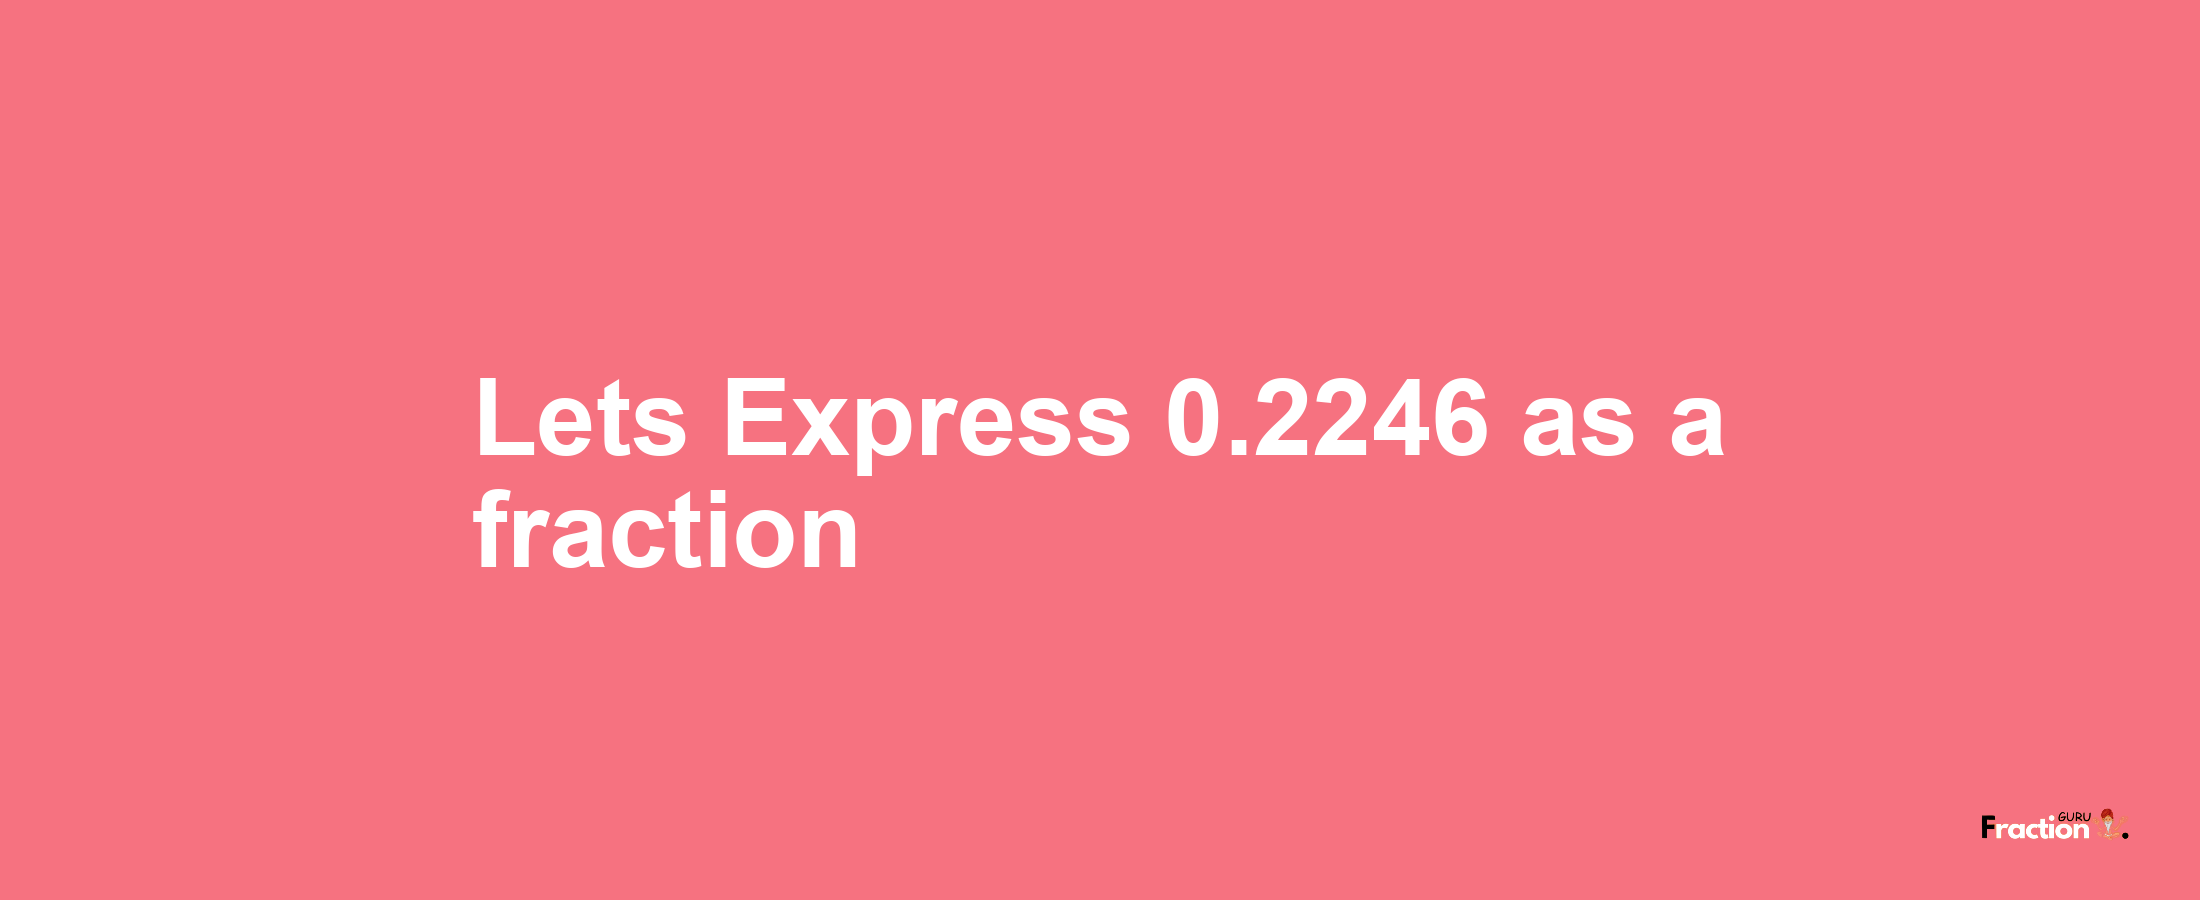 Lets Express 0.2246 as afraction